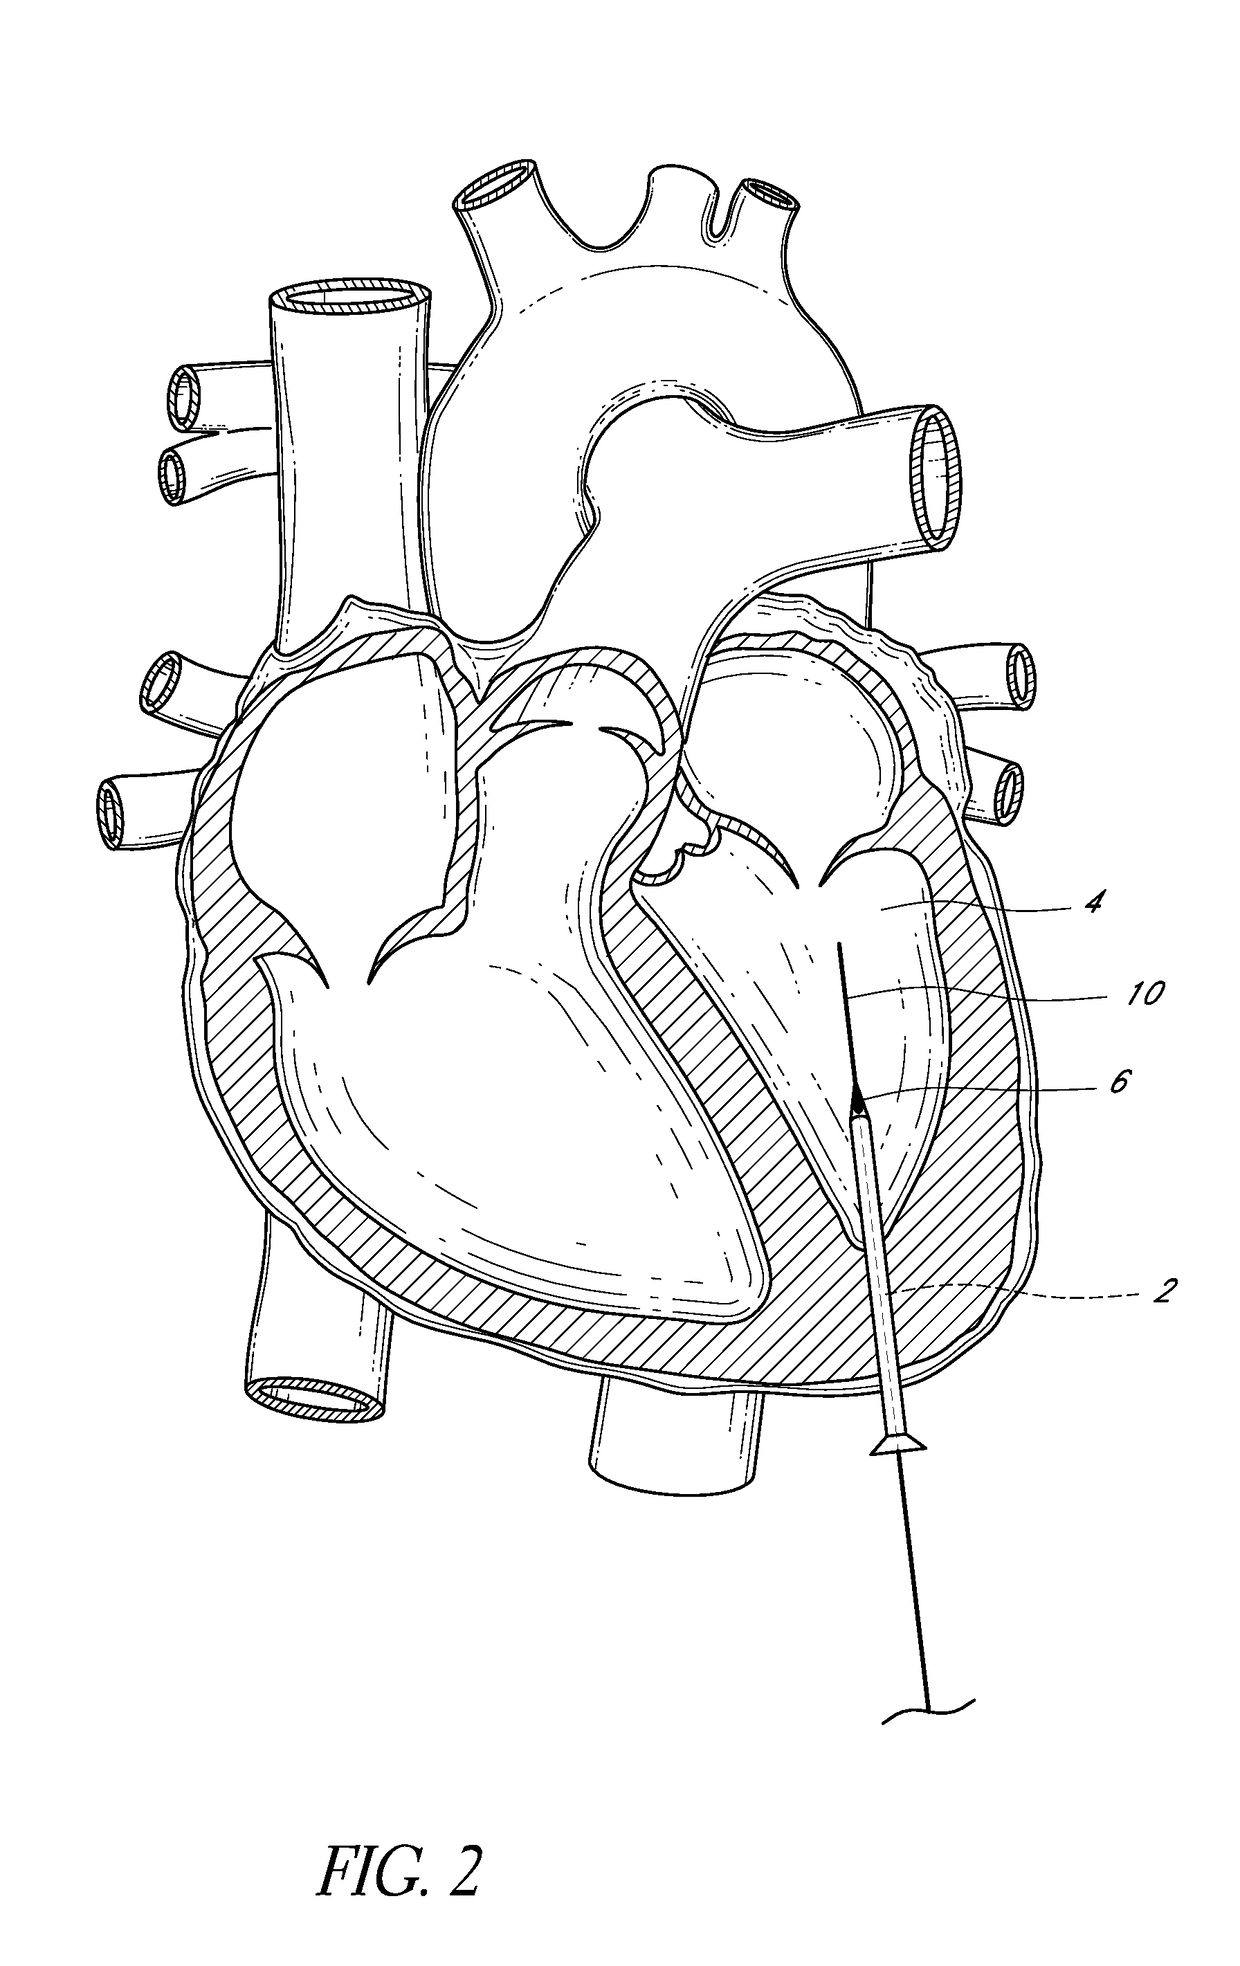 Cardiovascular access and device delivery system